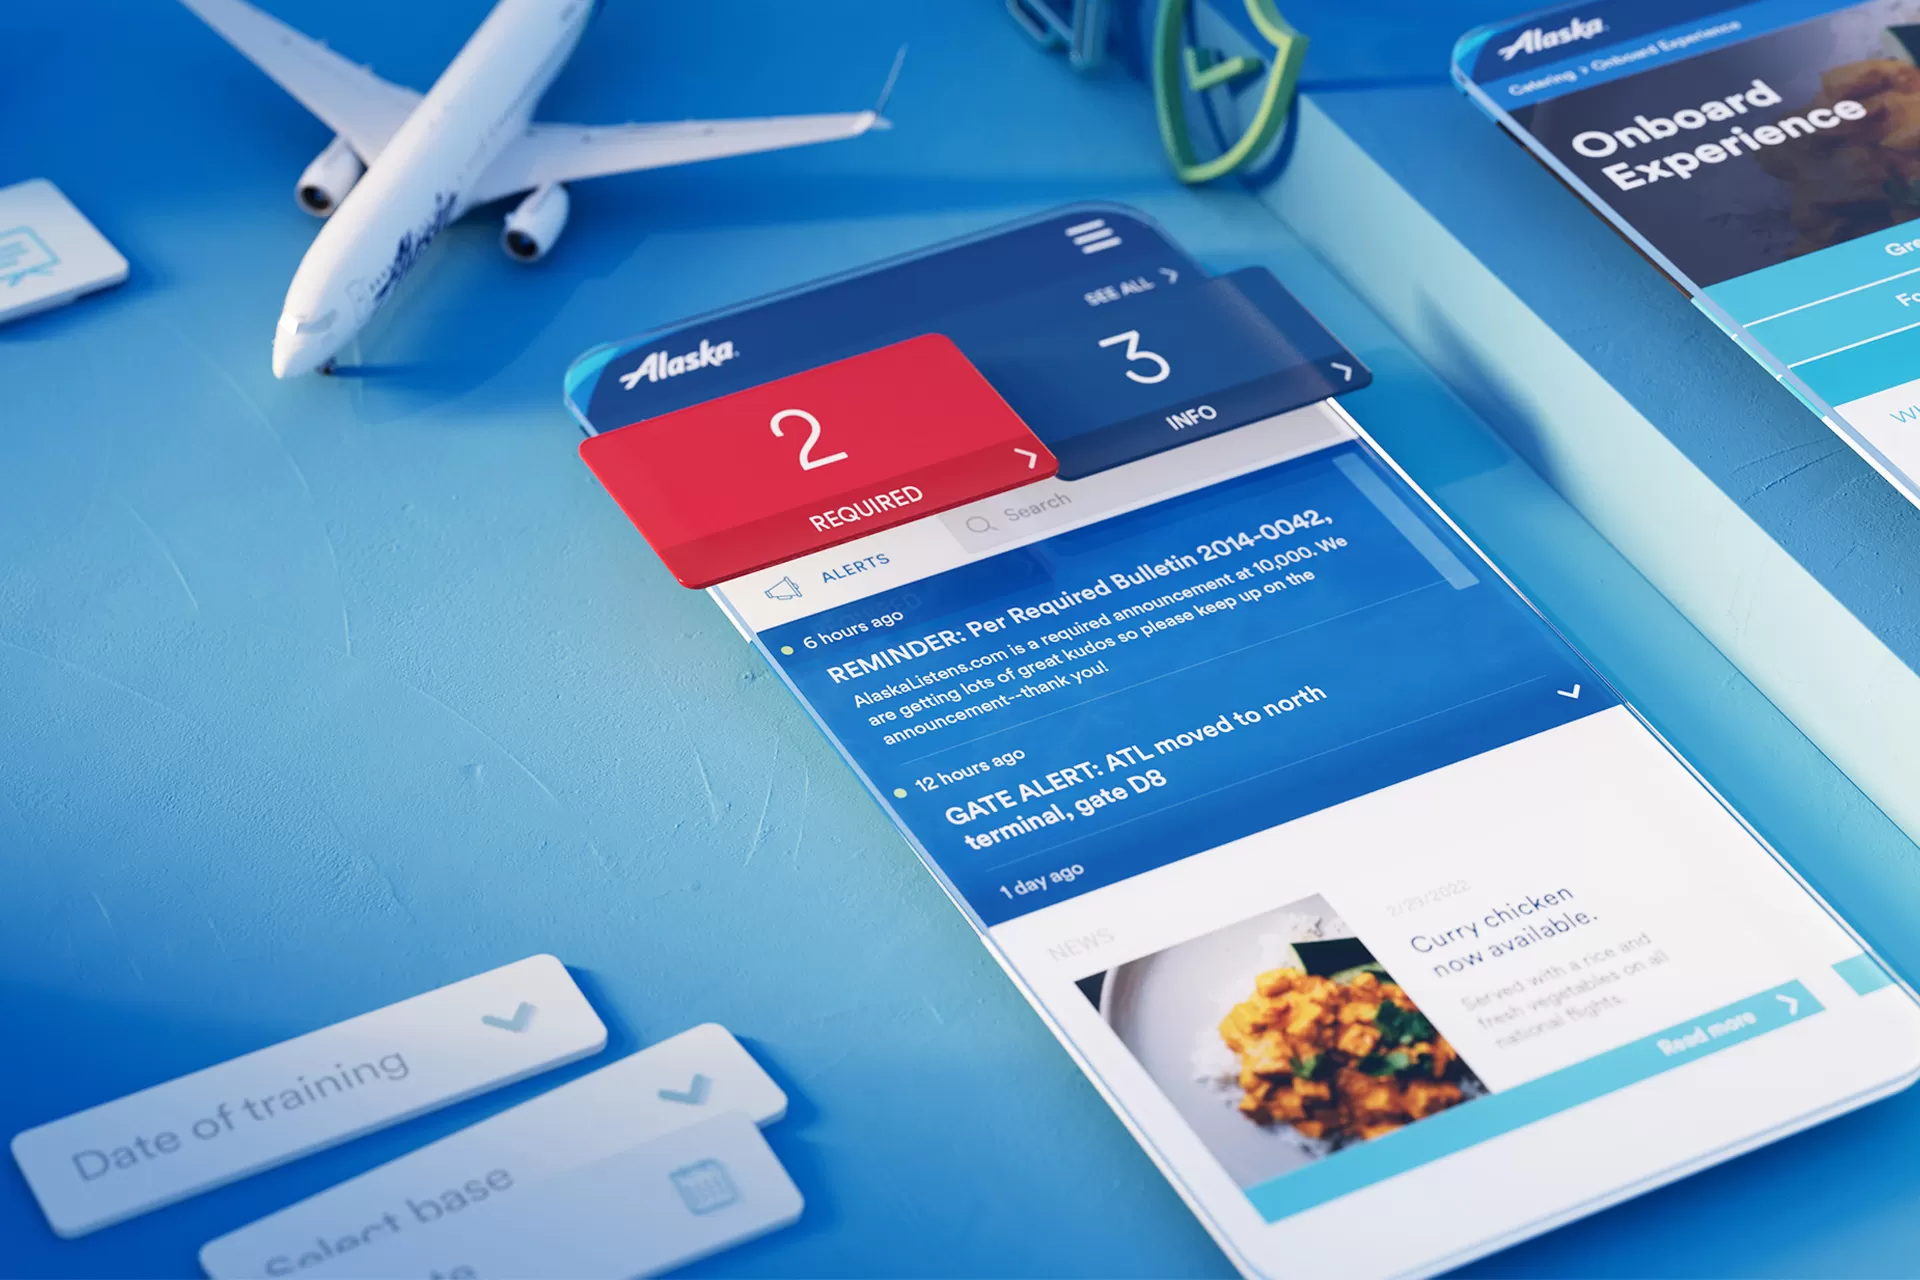 Putting Flight Crews of Alaska Airlines First With an Easy-to-use Digital Personal Assistant